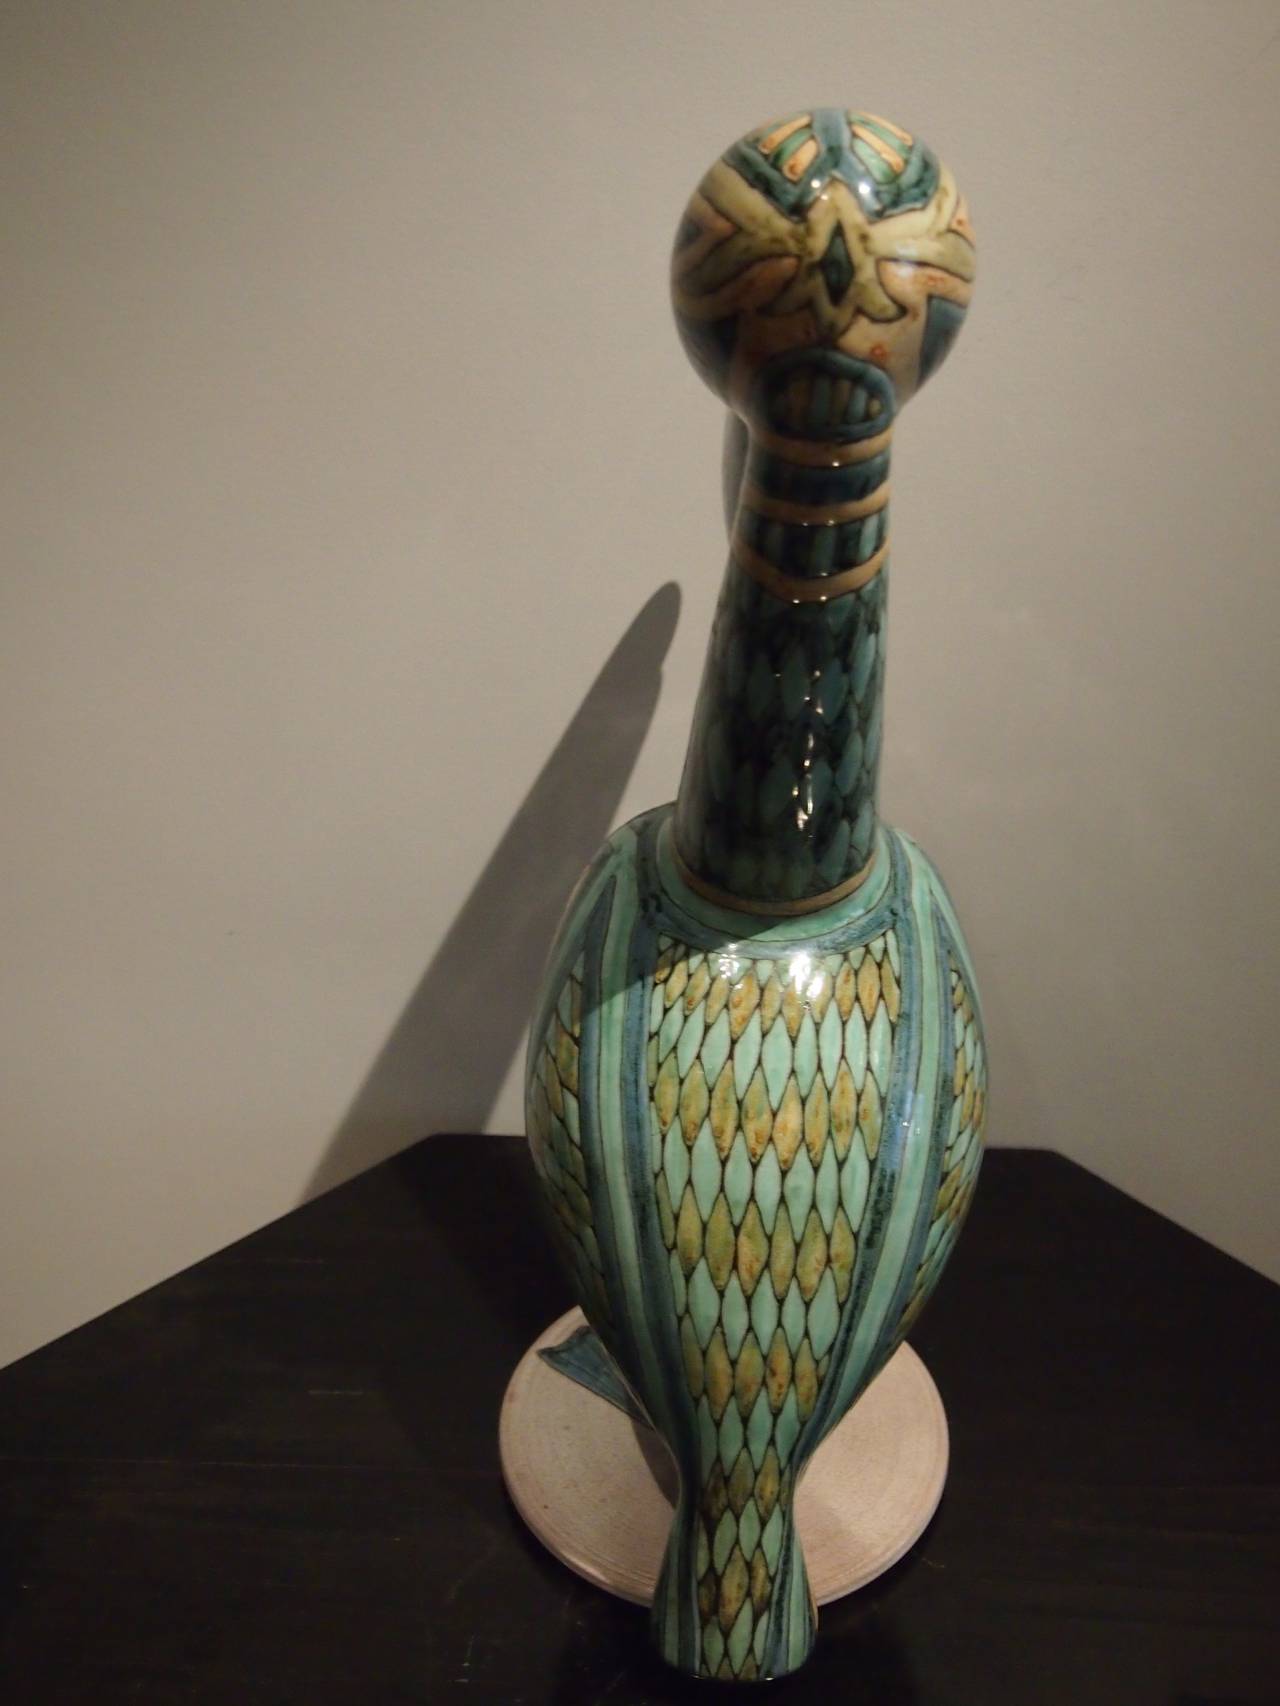 Earthenware Pelican Ceramic Sculpture with Cloisonné Enamel, French, 1960